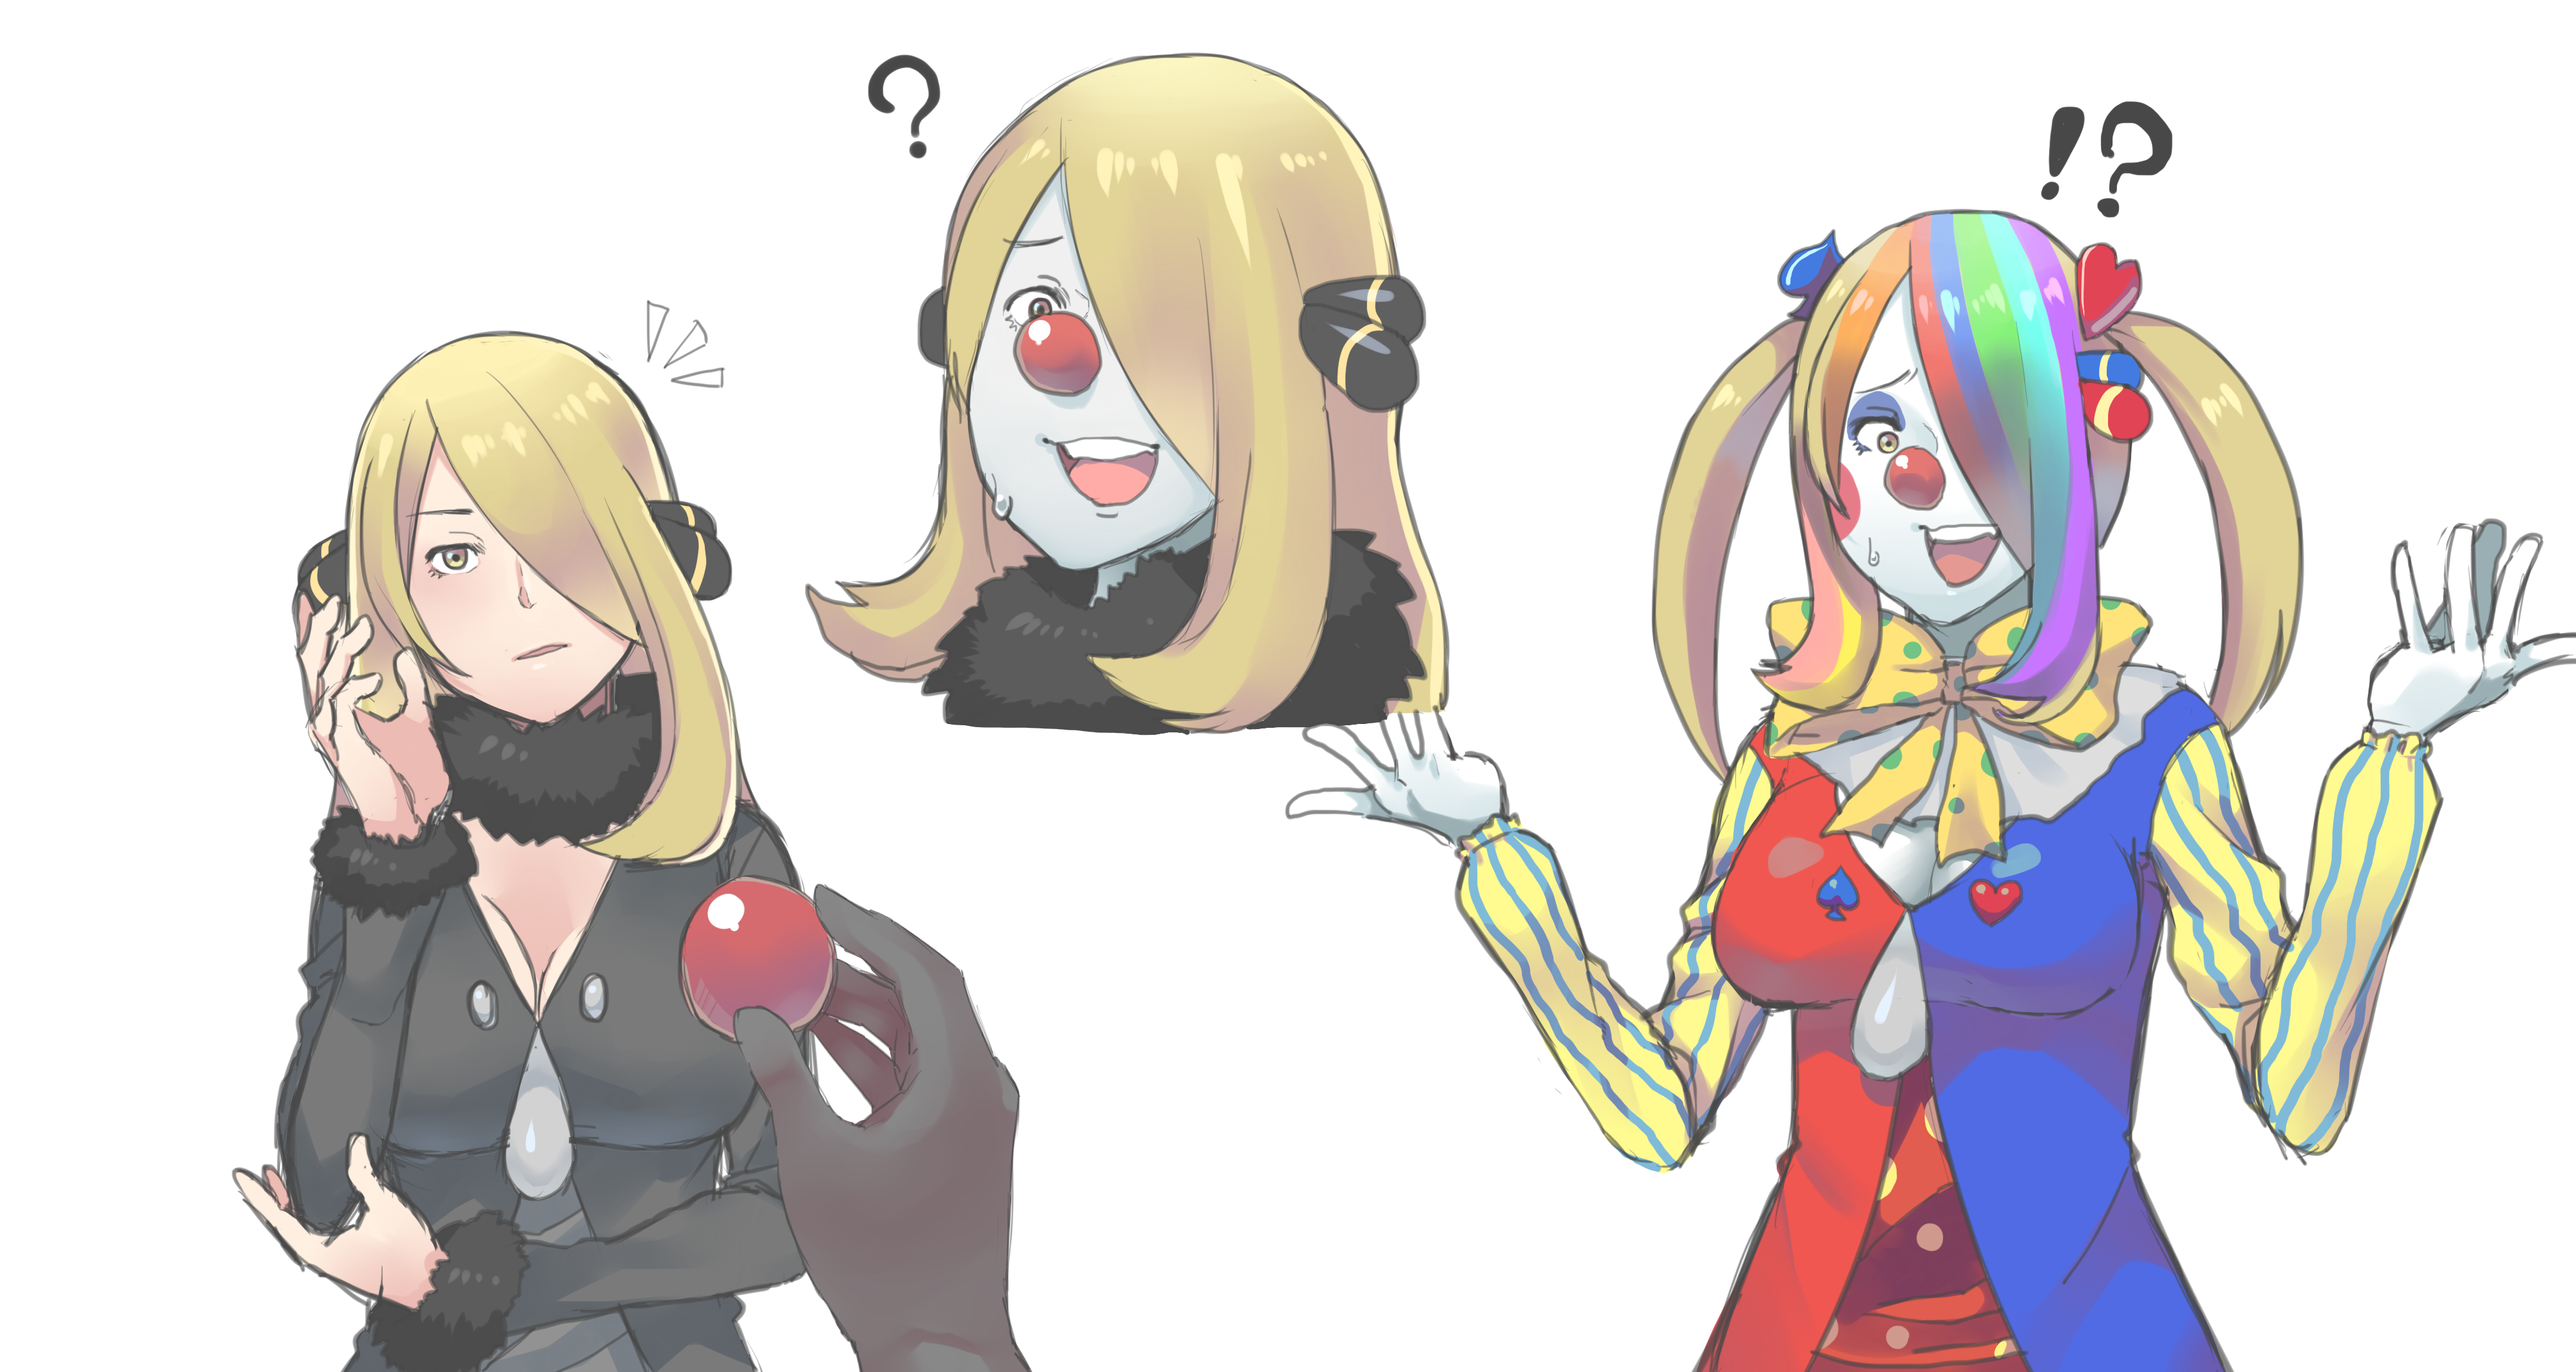 Your waifu becomes a clown what happens now.